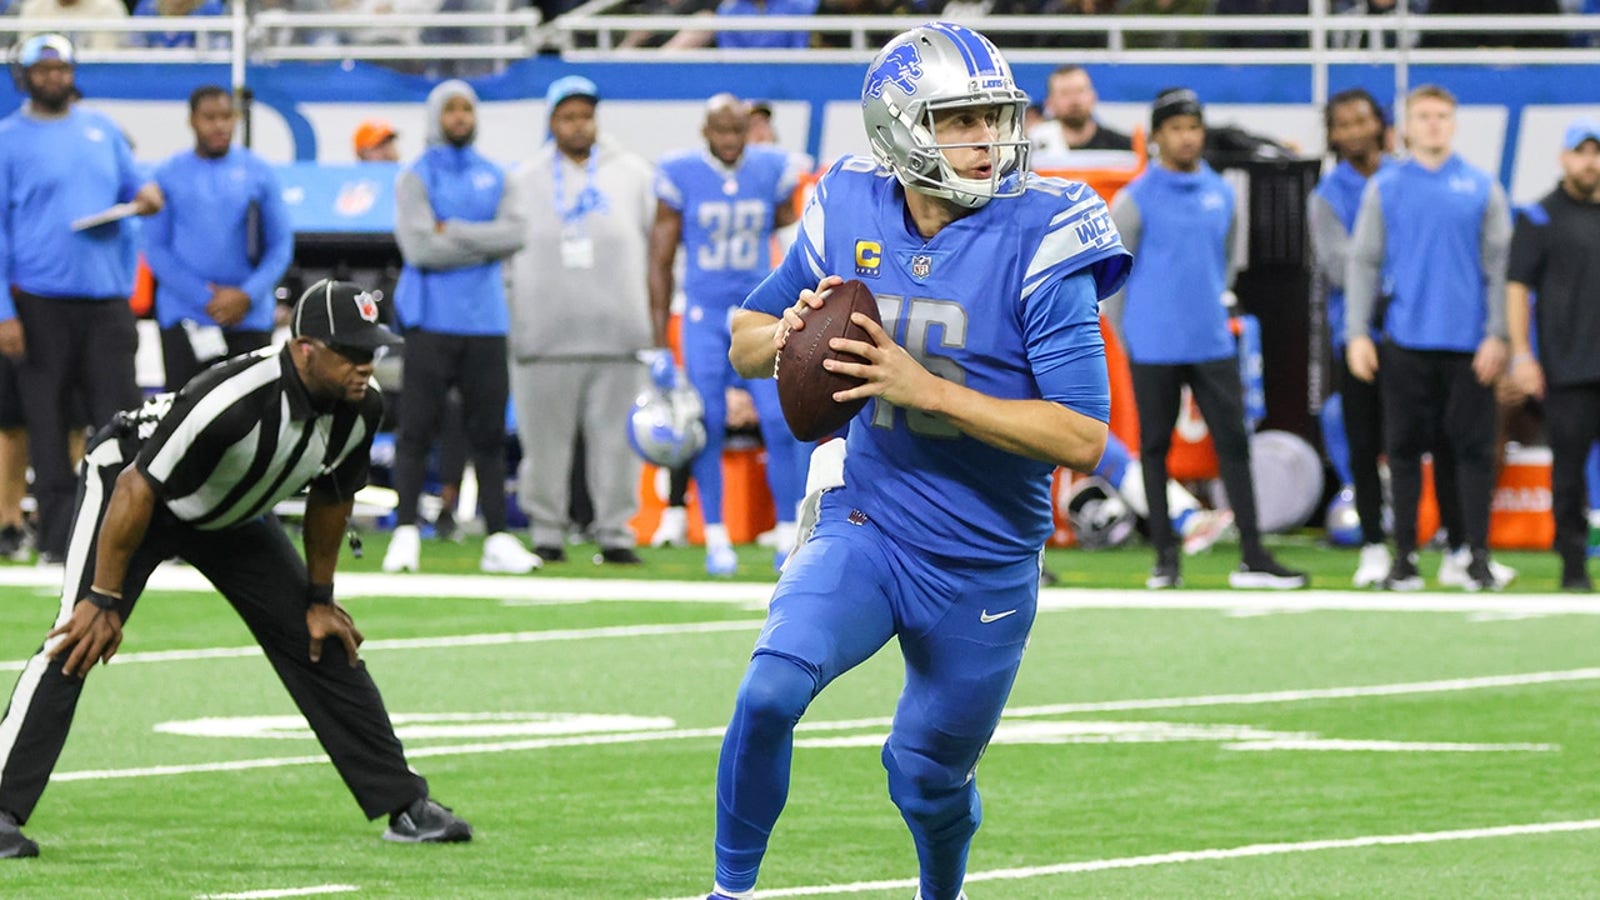 NFL Week 14: Should you bet on the Lions to cover against the Vikings this weekend?